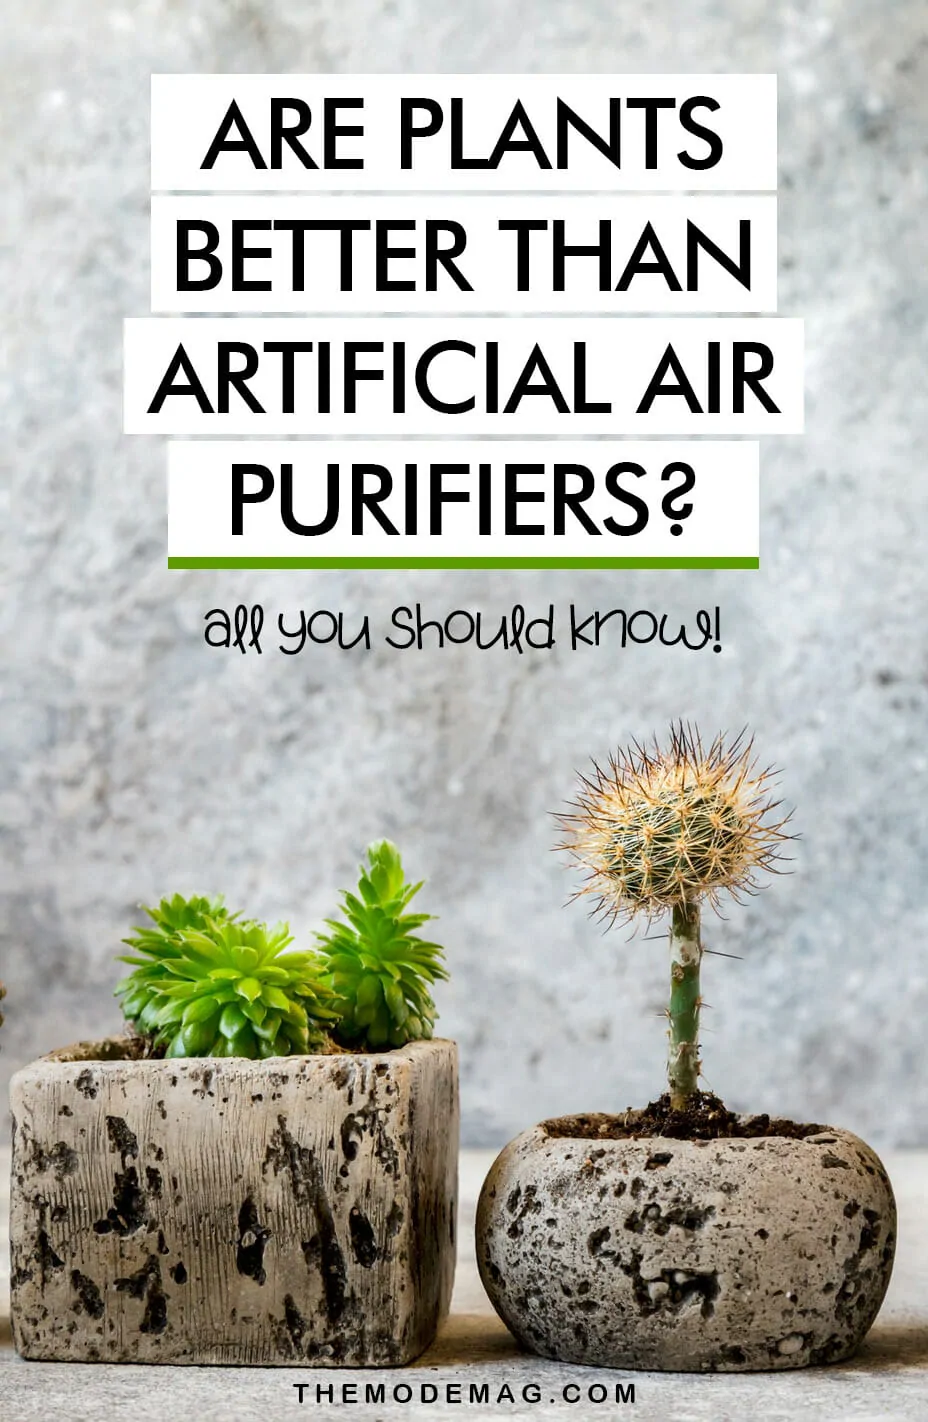 Are Plants Better Than Artificial Air Purifiers?